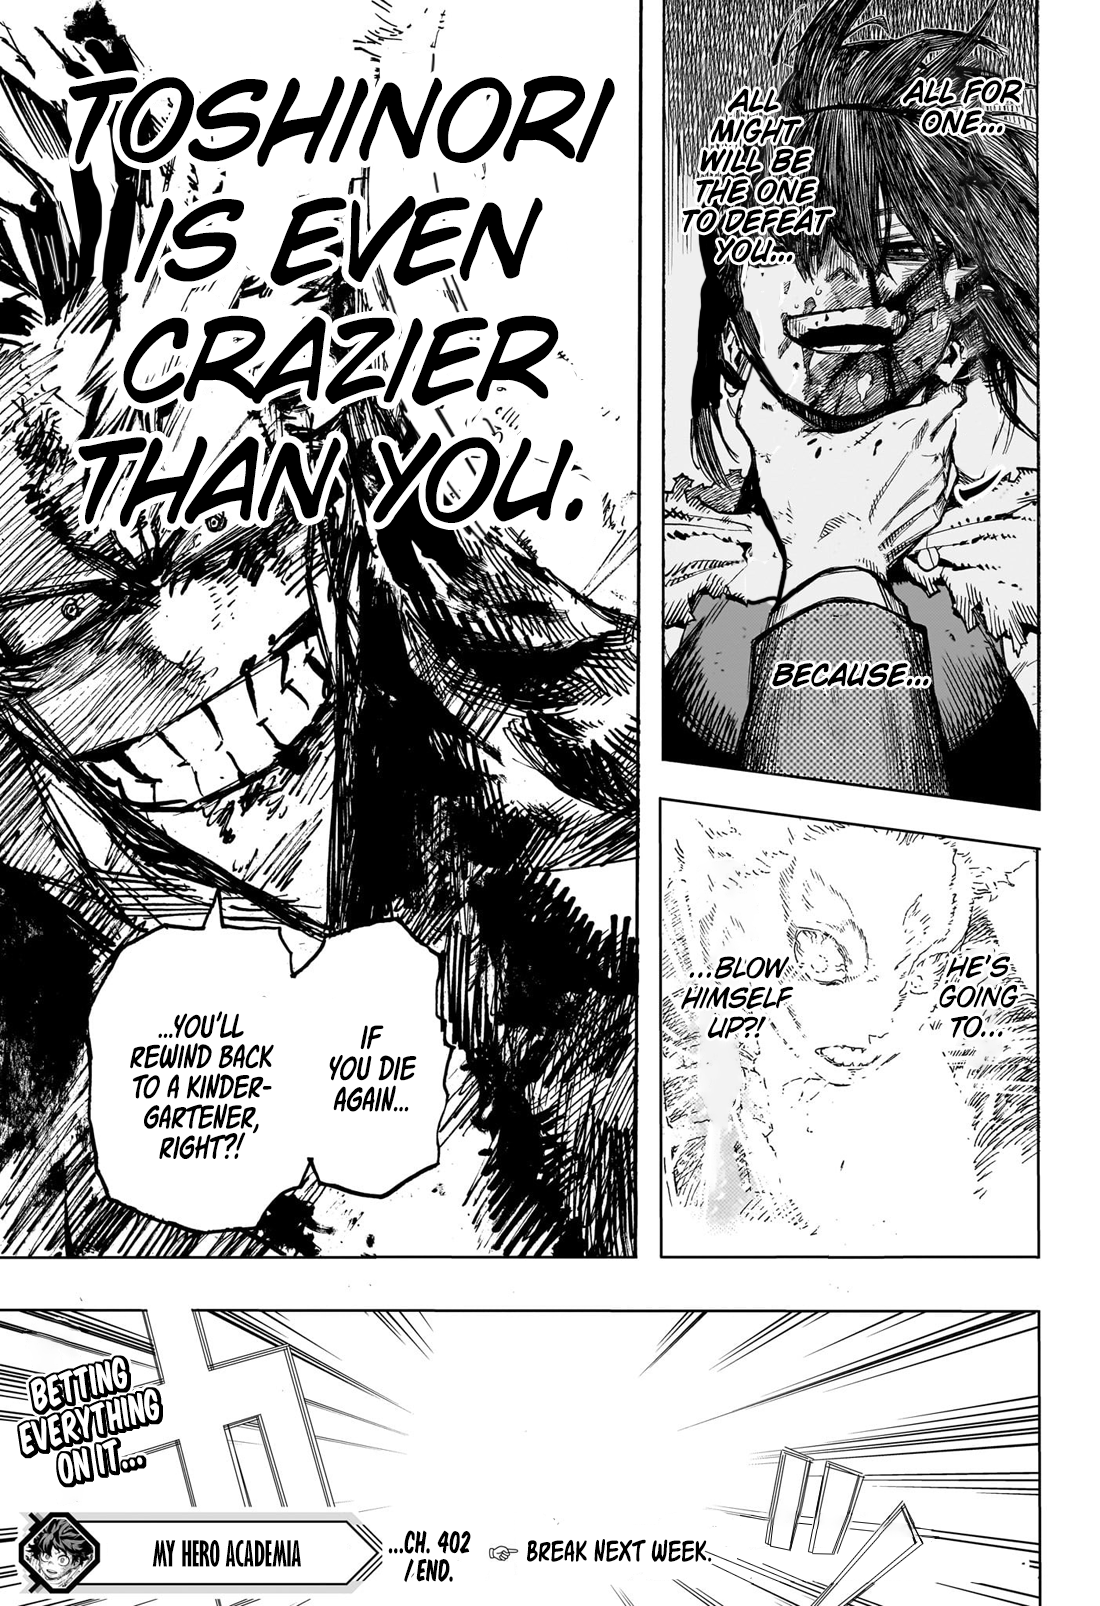 My Hero Academia Chapter 402 Spoilers & Raw Scans: Another Death?